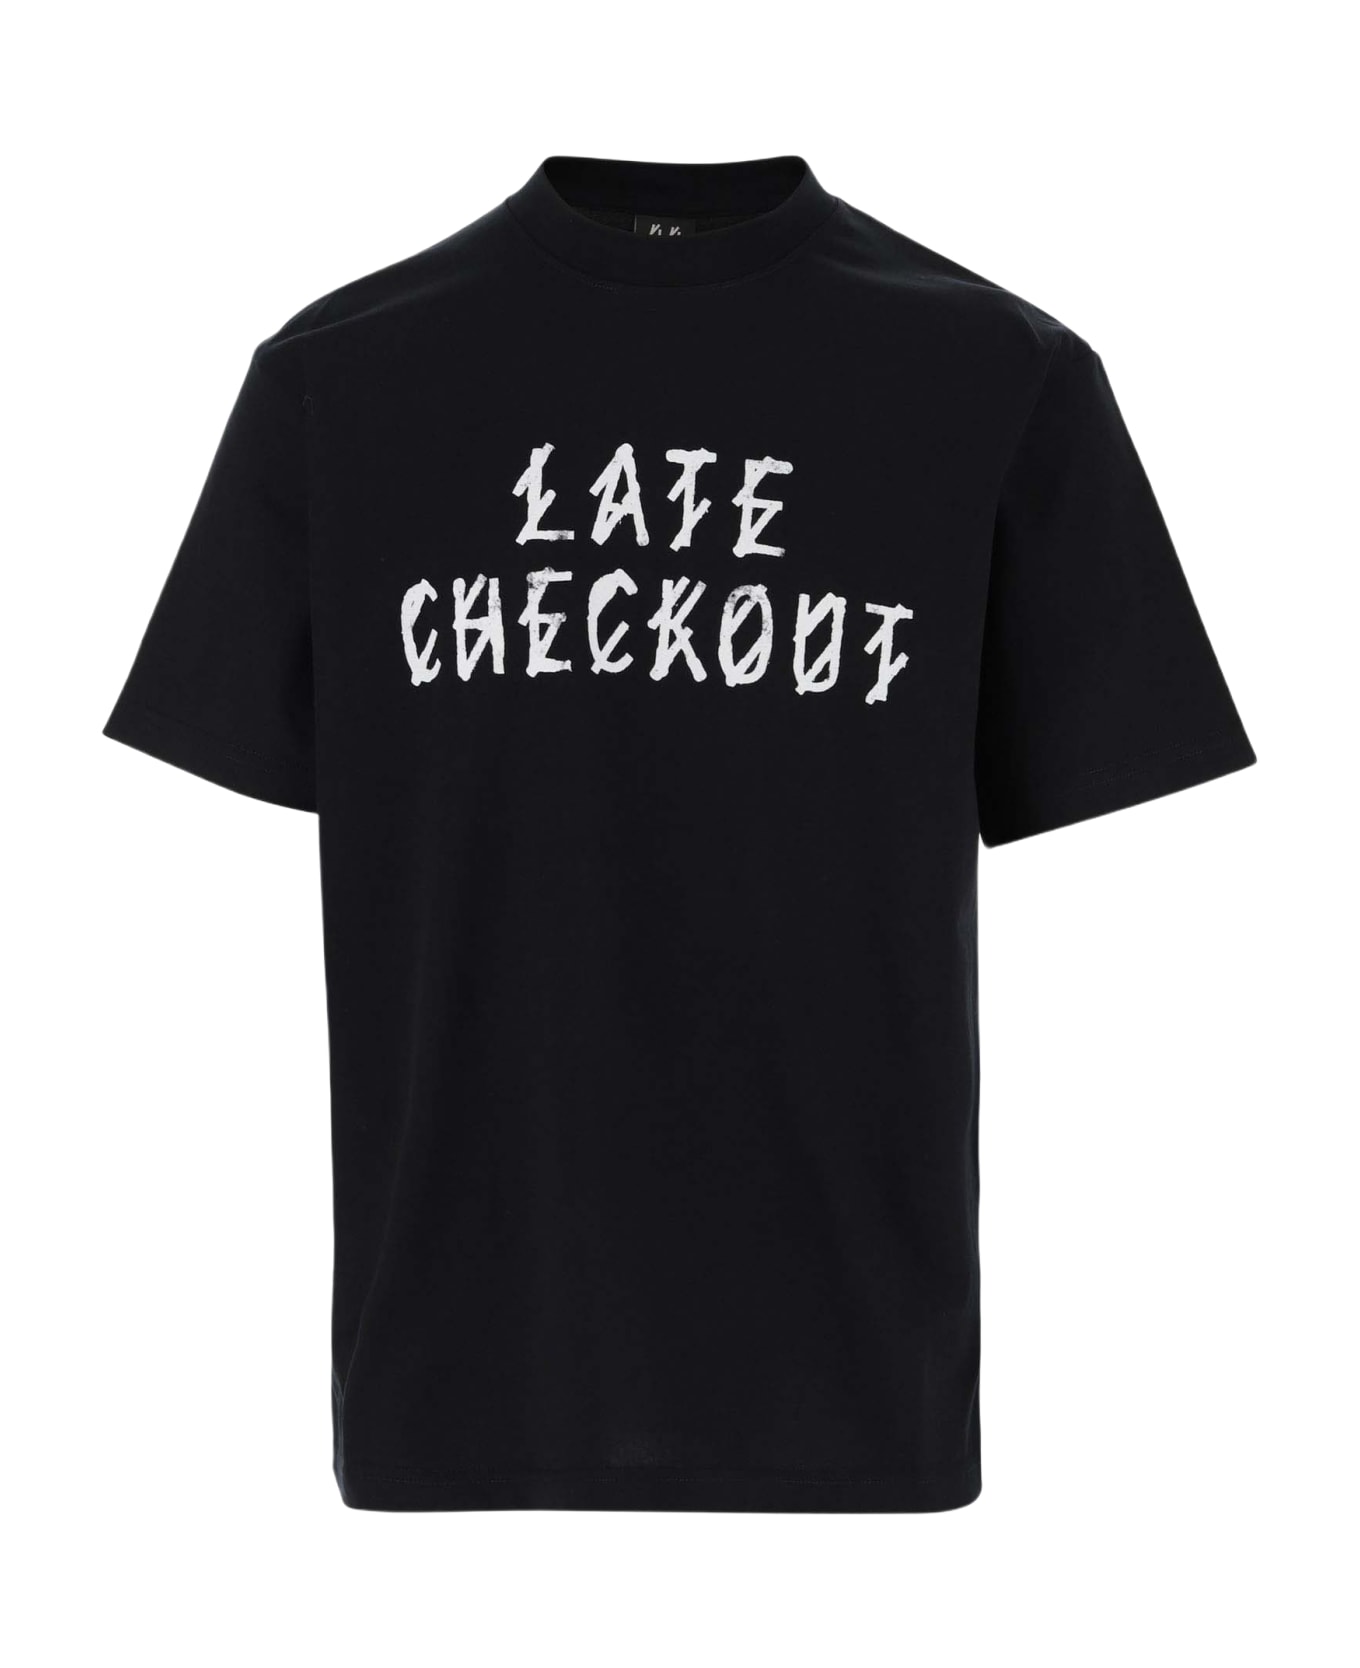 44 Label Group Cotton T-shirt With Graphic Print And Logo - Black+late checkout